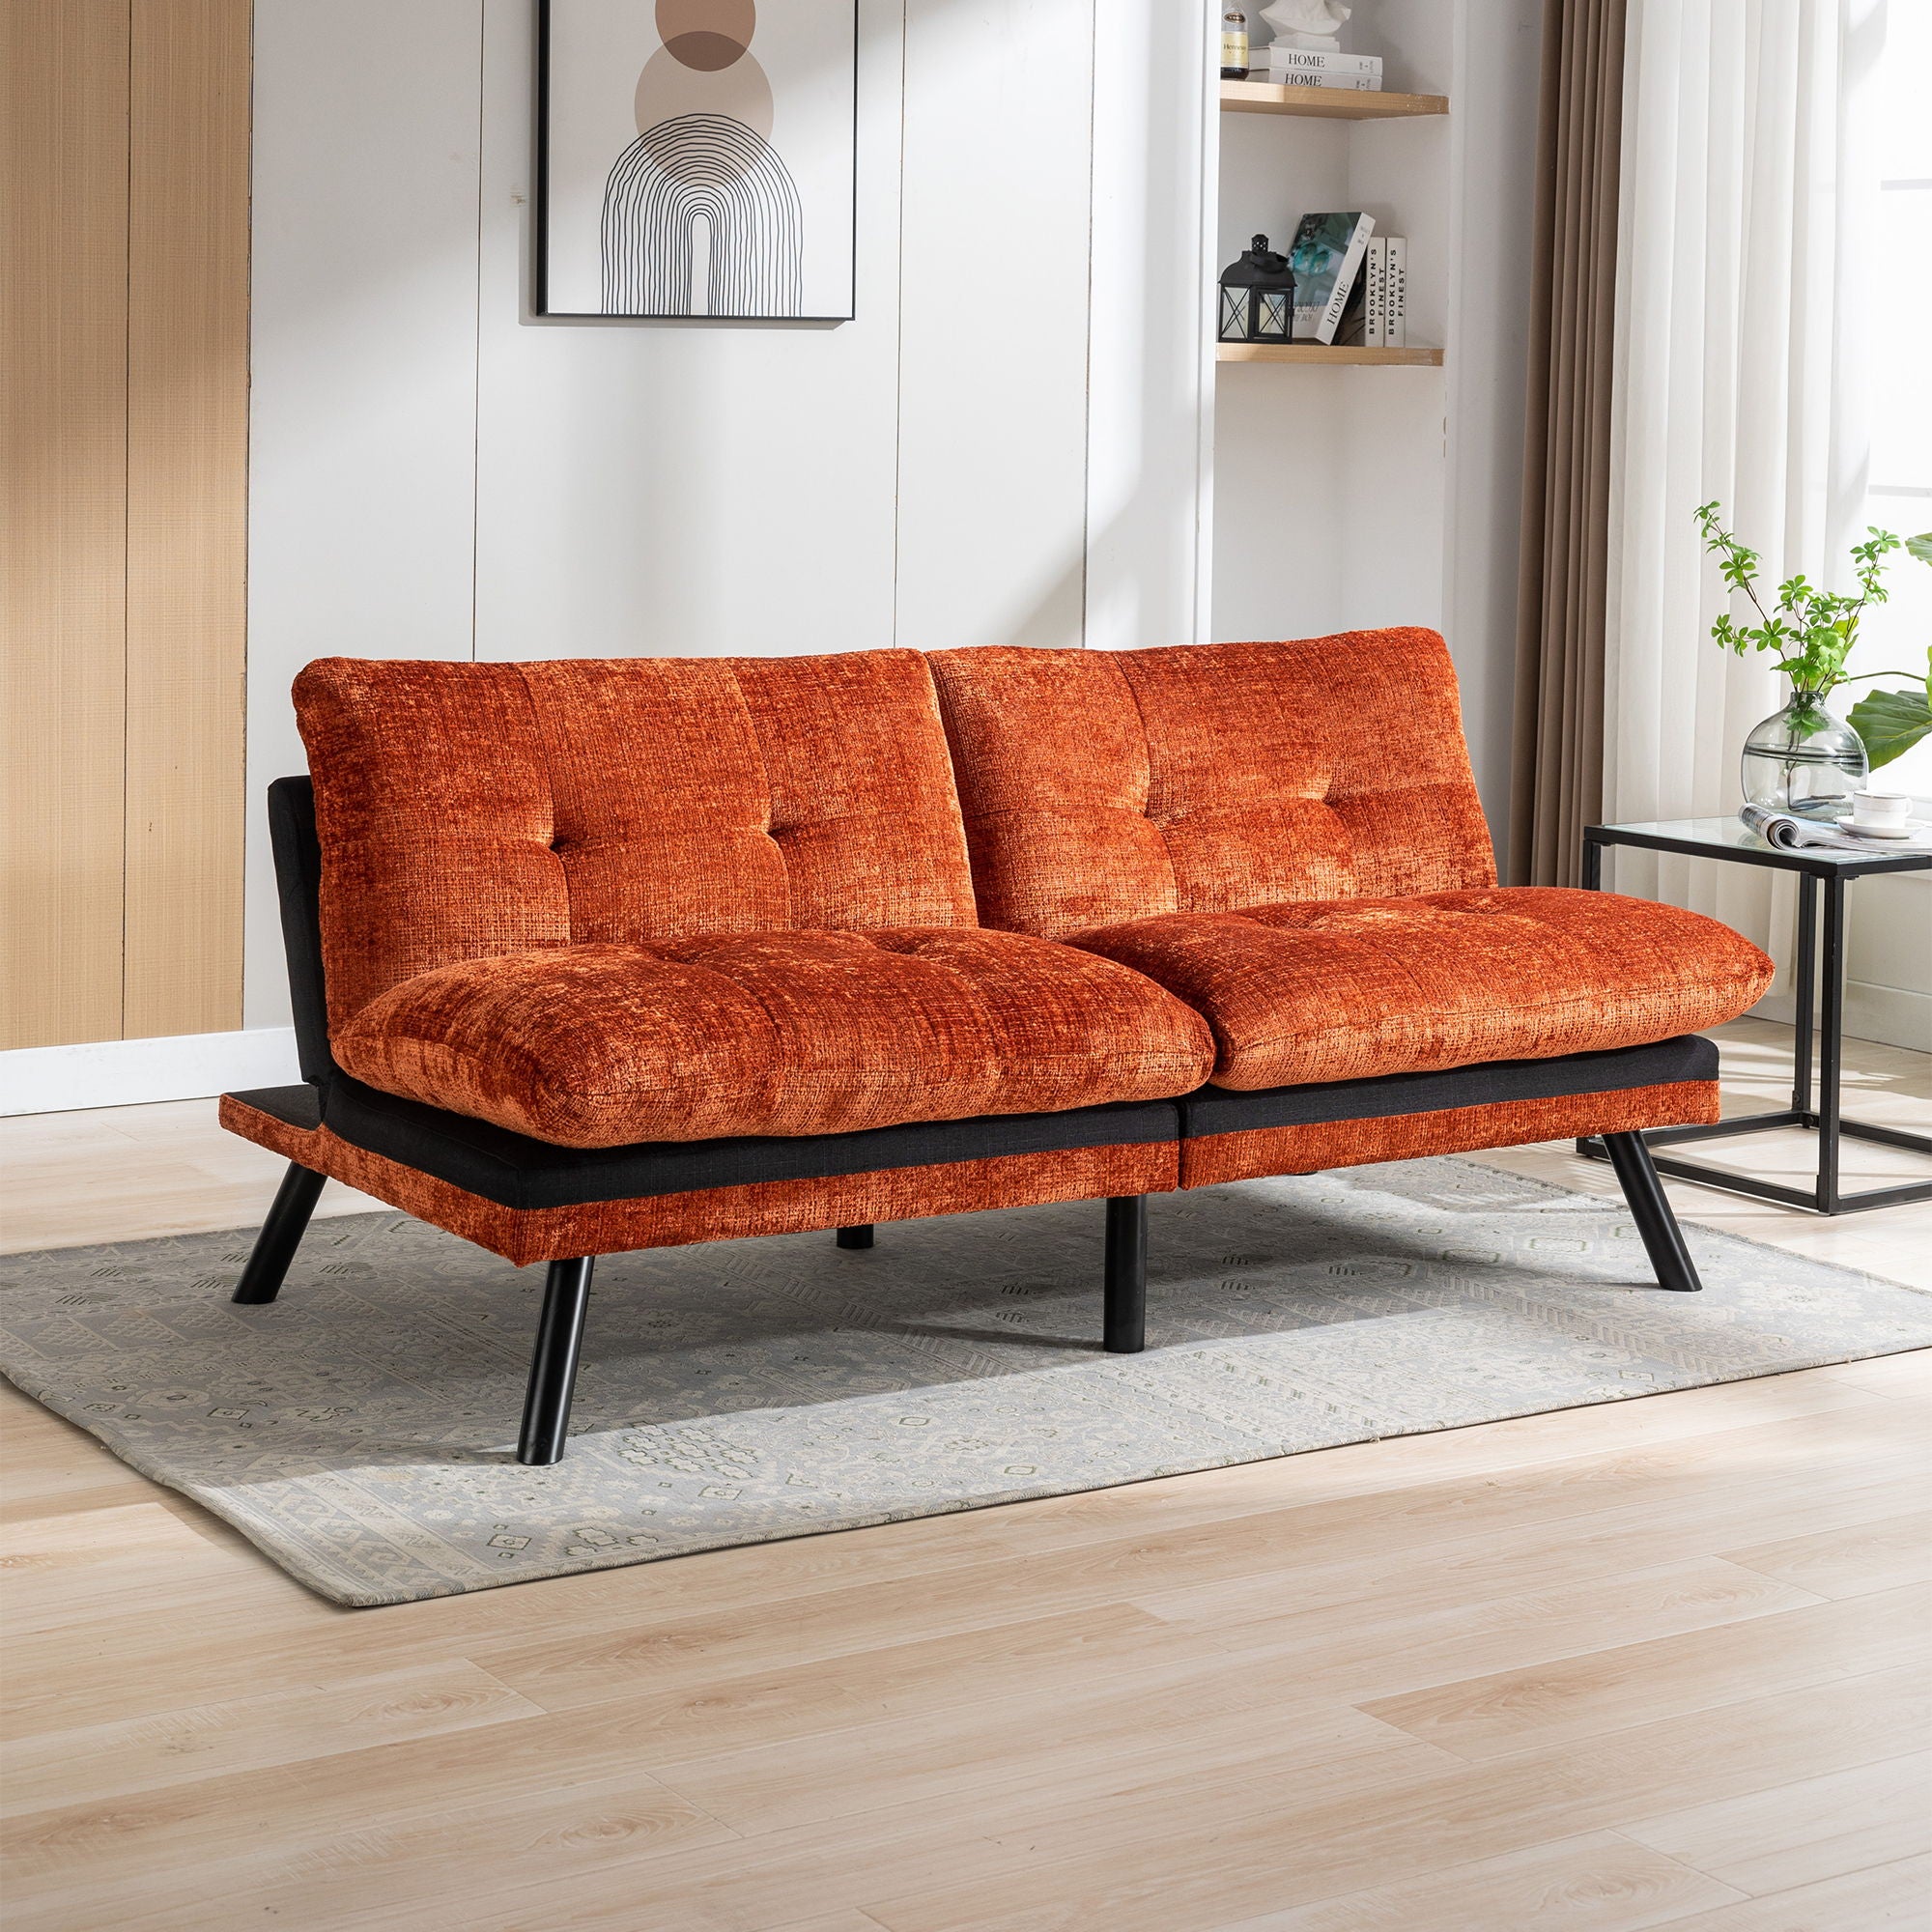 Convertible Sofa Bed Loveseat Futon Bed Breathable Adjustable Lounge Couch With Metal Legs, Futon Sets For Compact Living Space Chenille- Orange